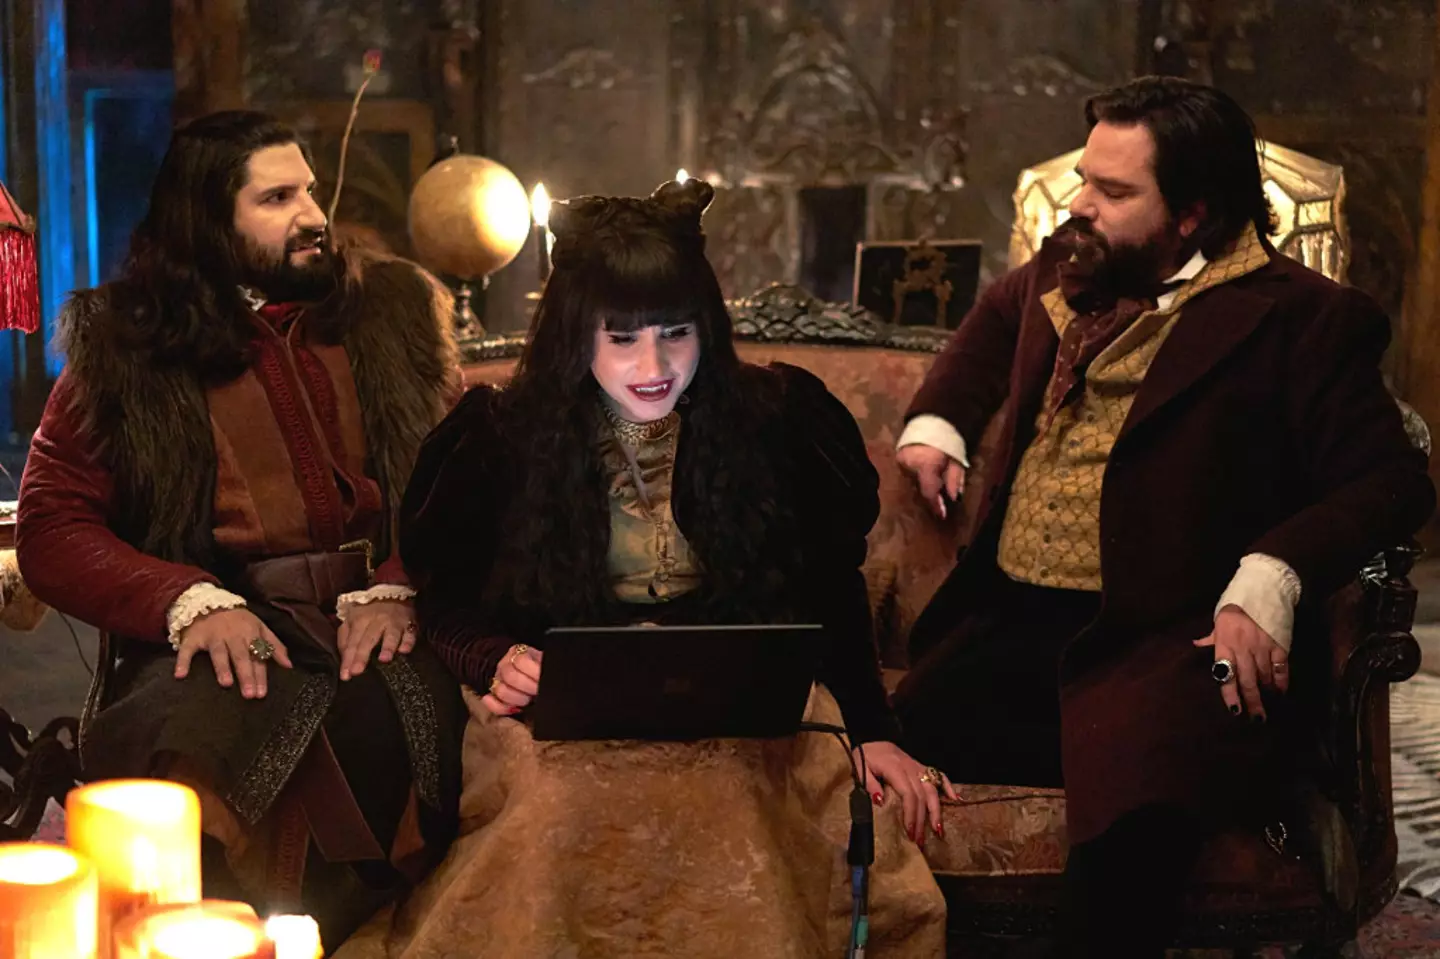 What We Do in the Shadows will wrap up after the sixth season.